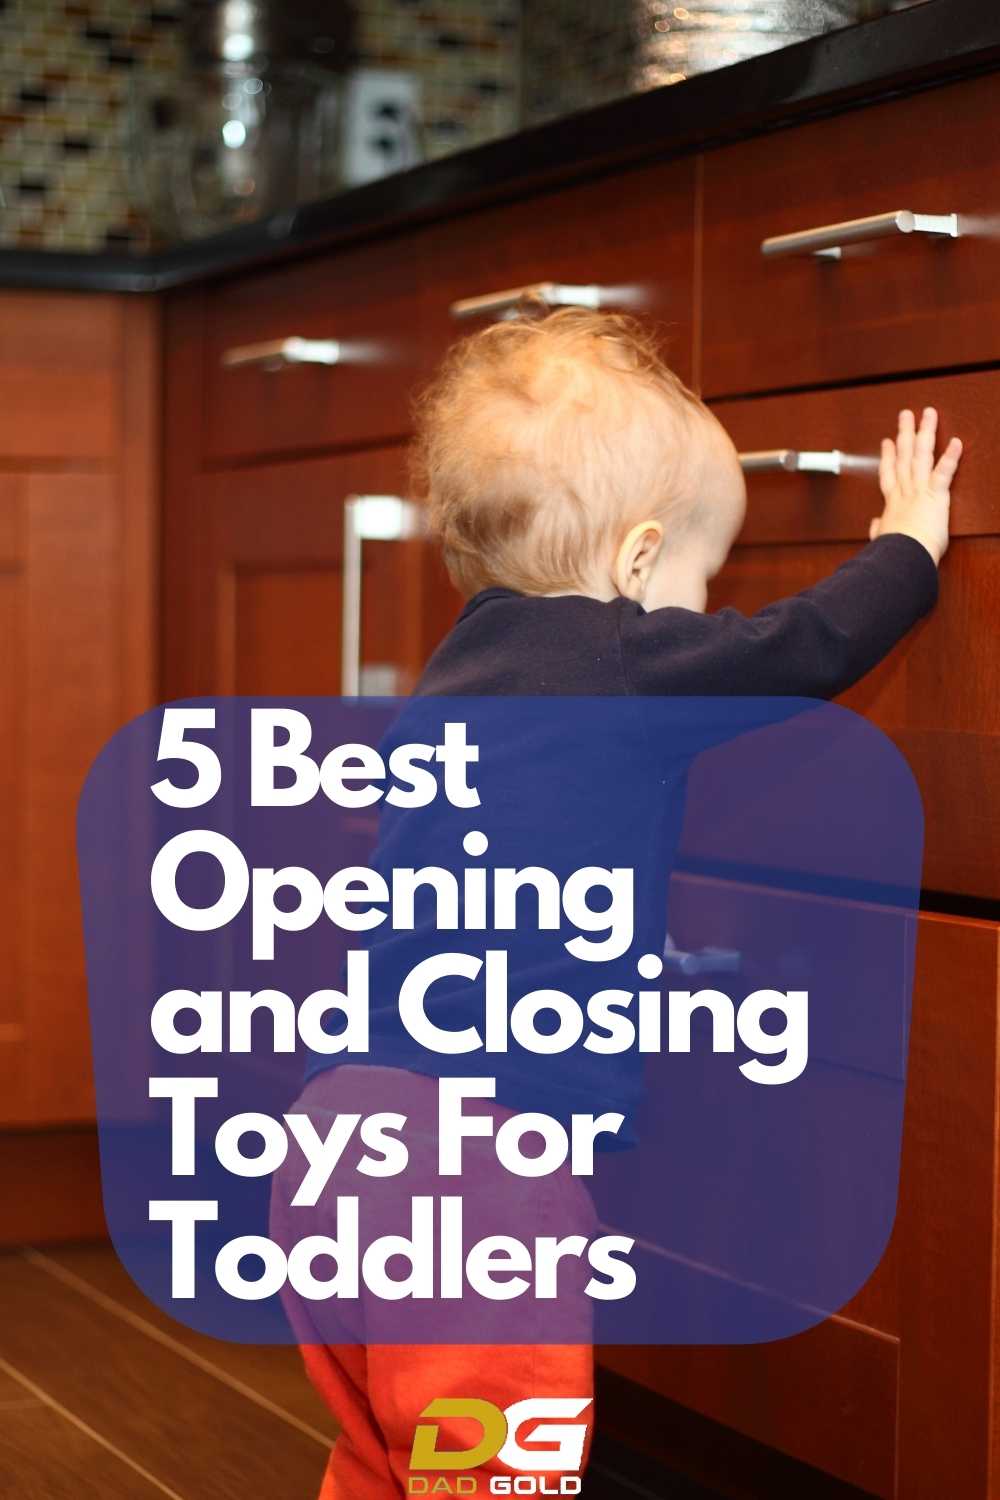 5 Best Opening and Closing Toys For Toddlers